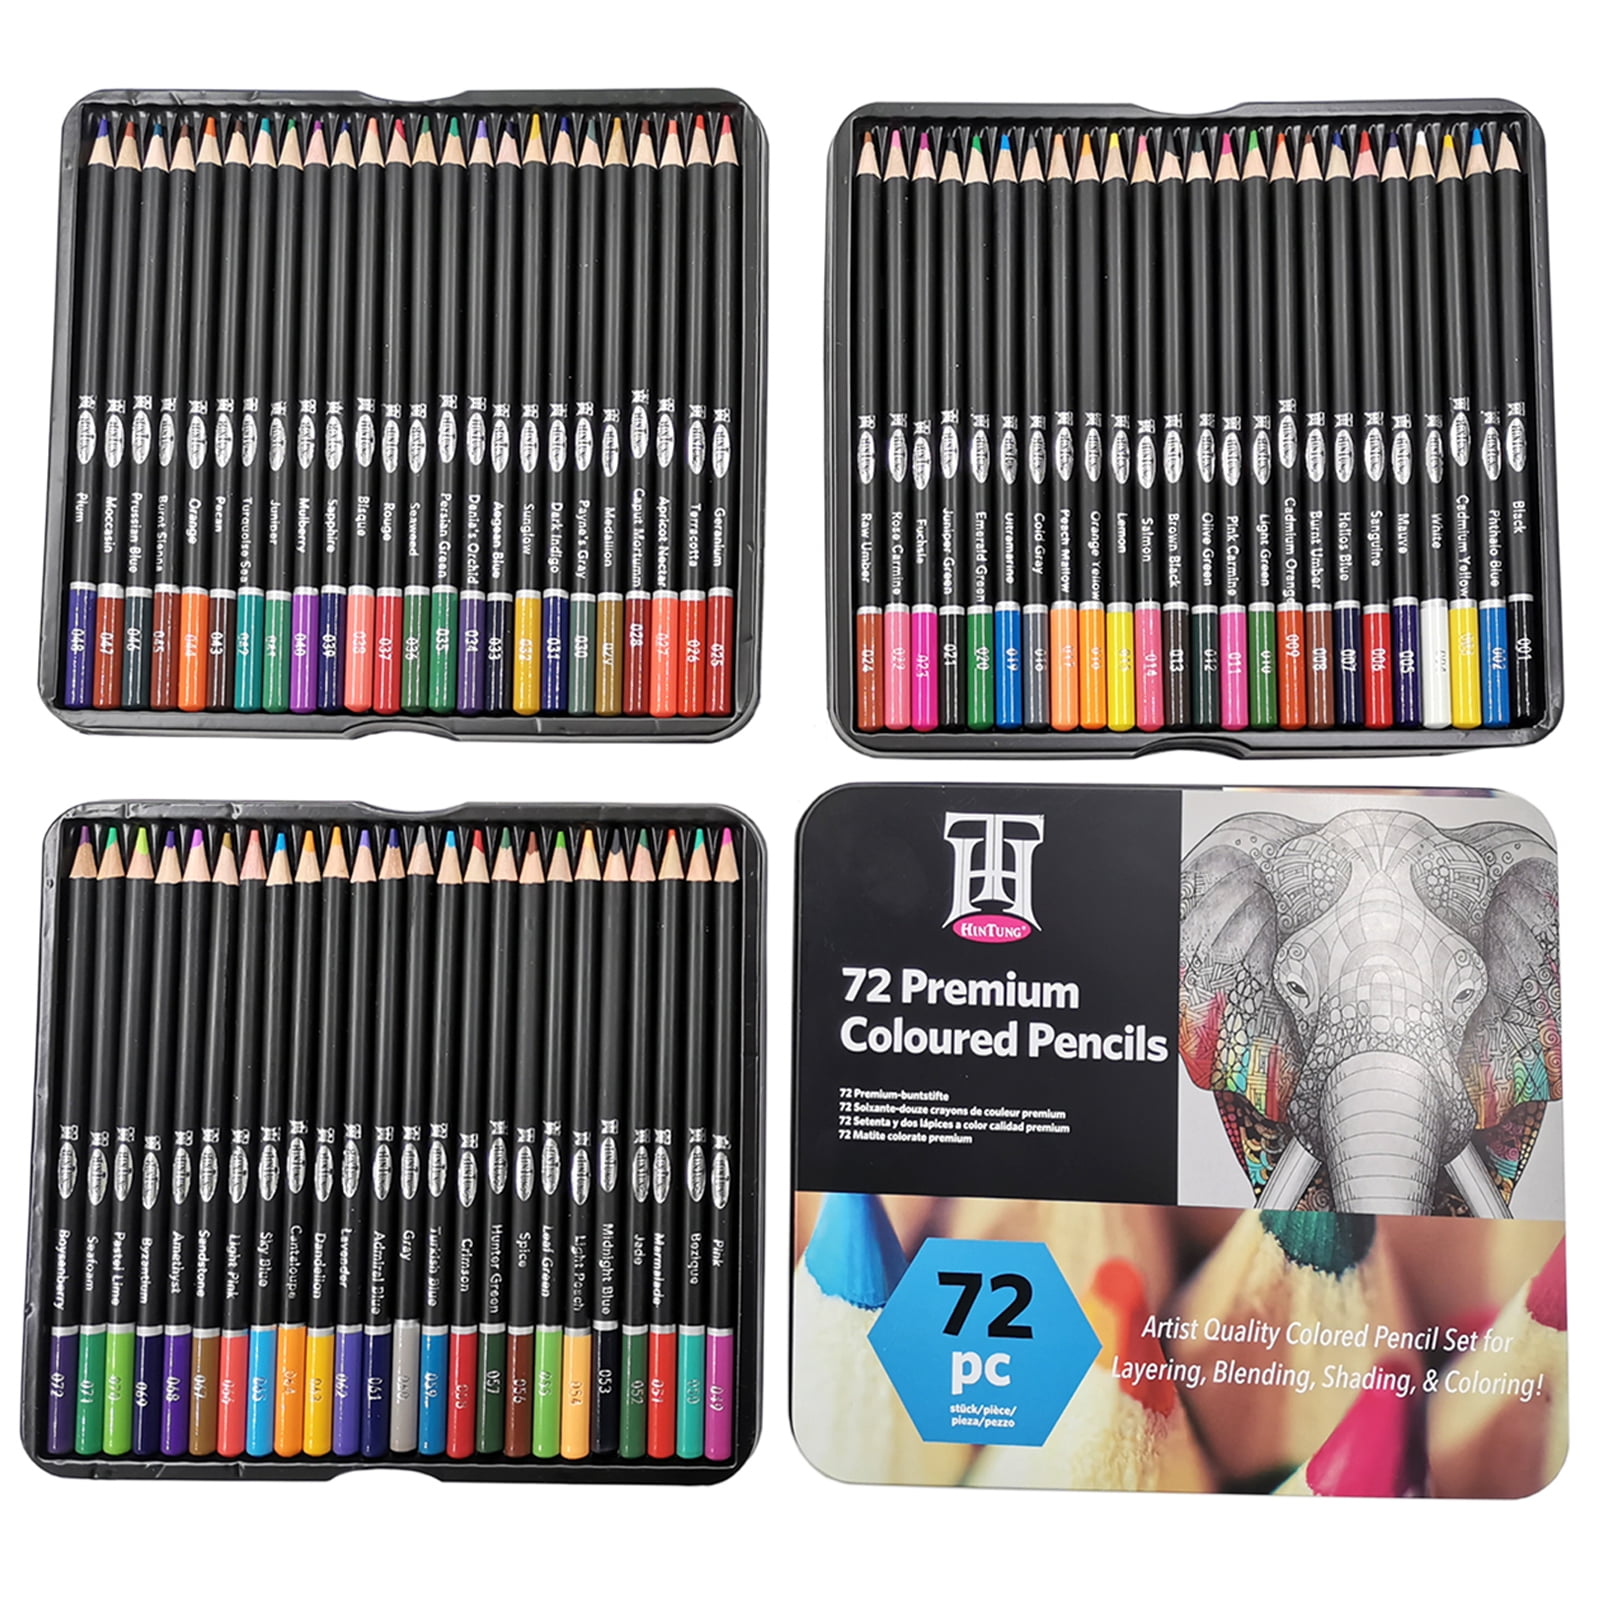 HIFORNY 75 Pack Colored Pencils Set for Adult Coloring,72 Colors Coloring  Pencils with Extras,Artists Soft Core,Vibrant Color,Drawing Pencils Art